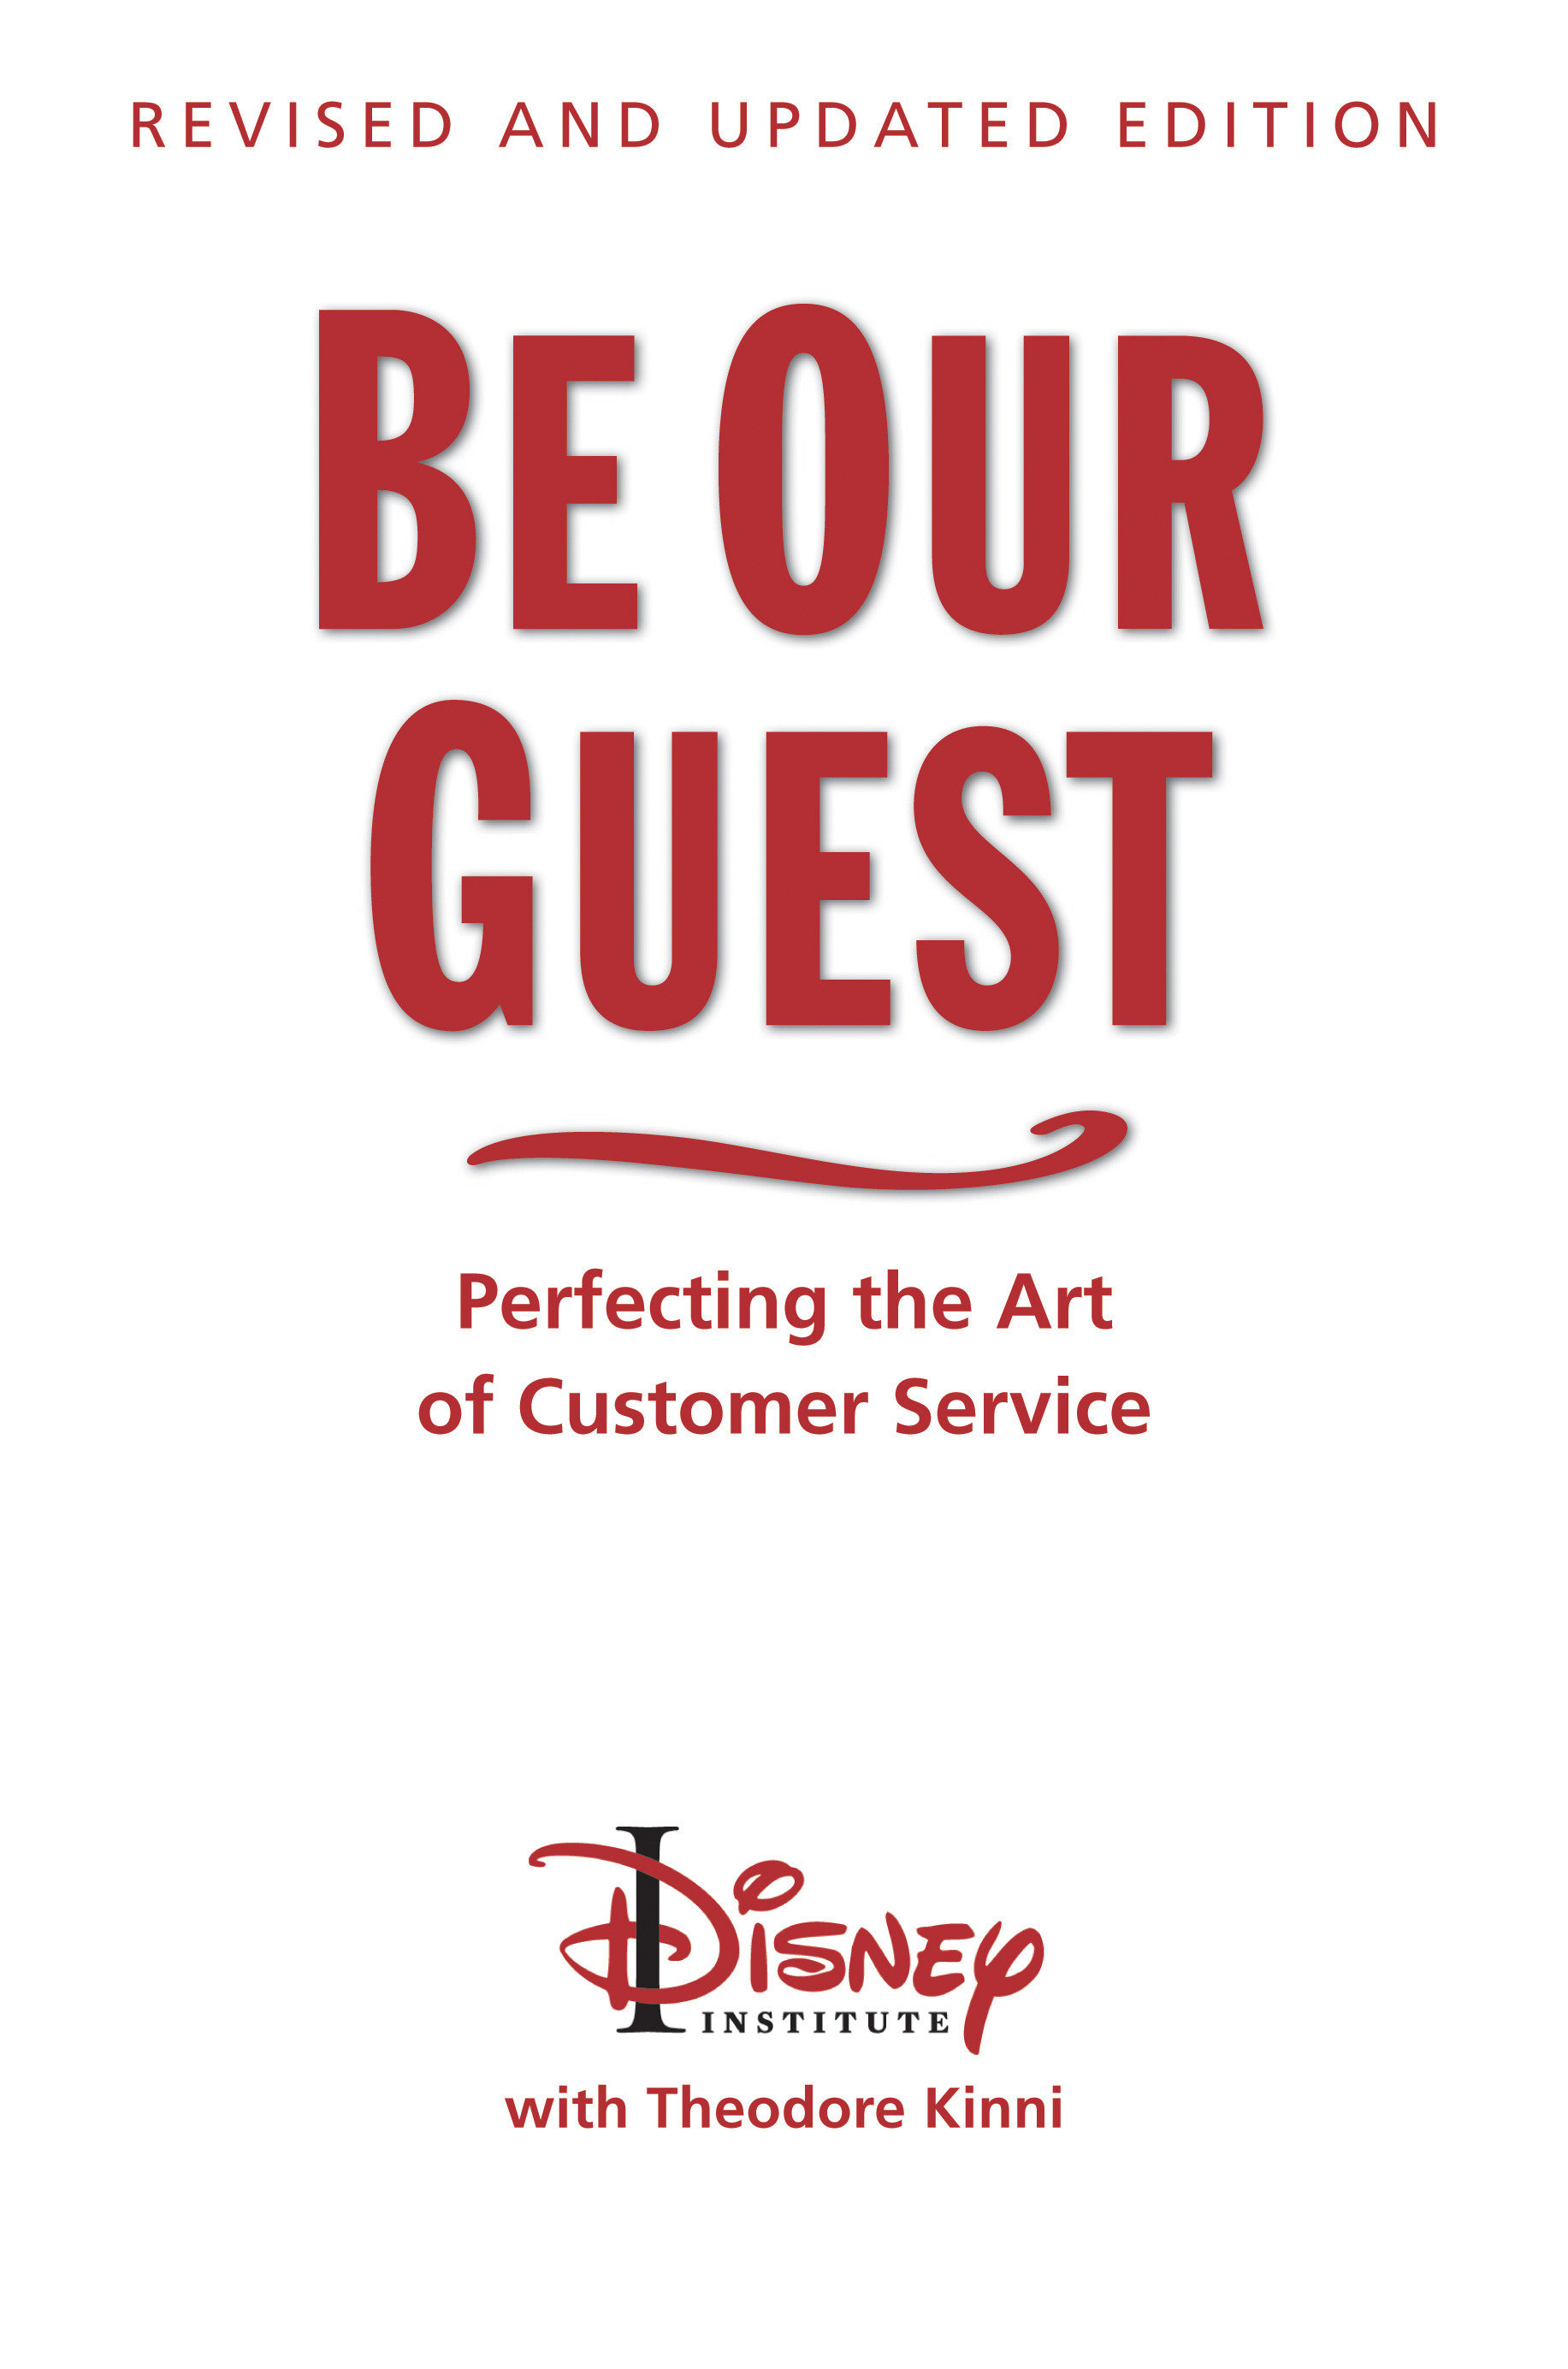 Be Our Guest-Revised And Updated Edition (Hardcover Book)